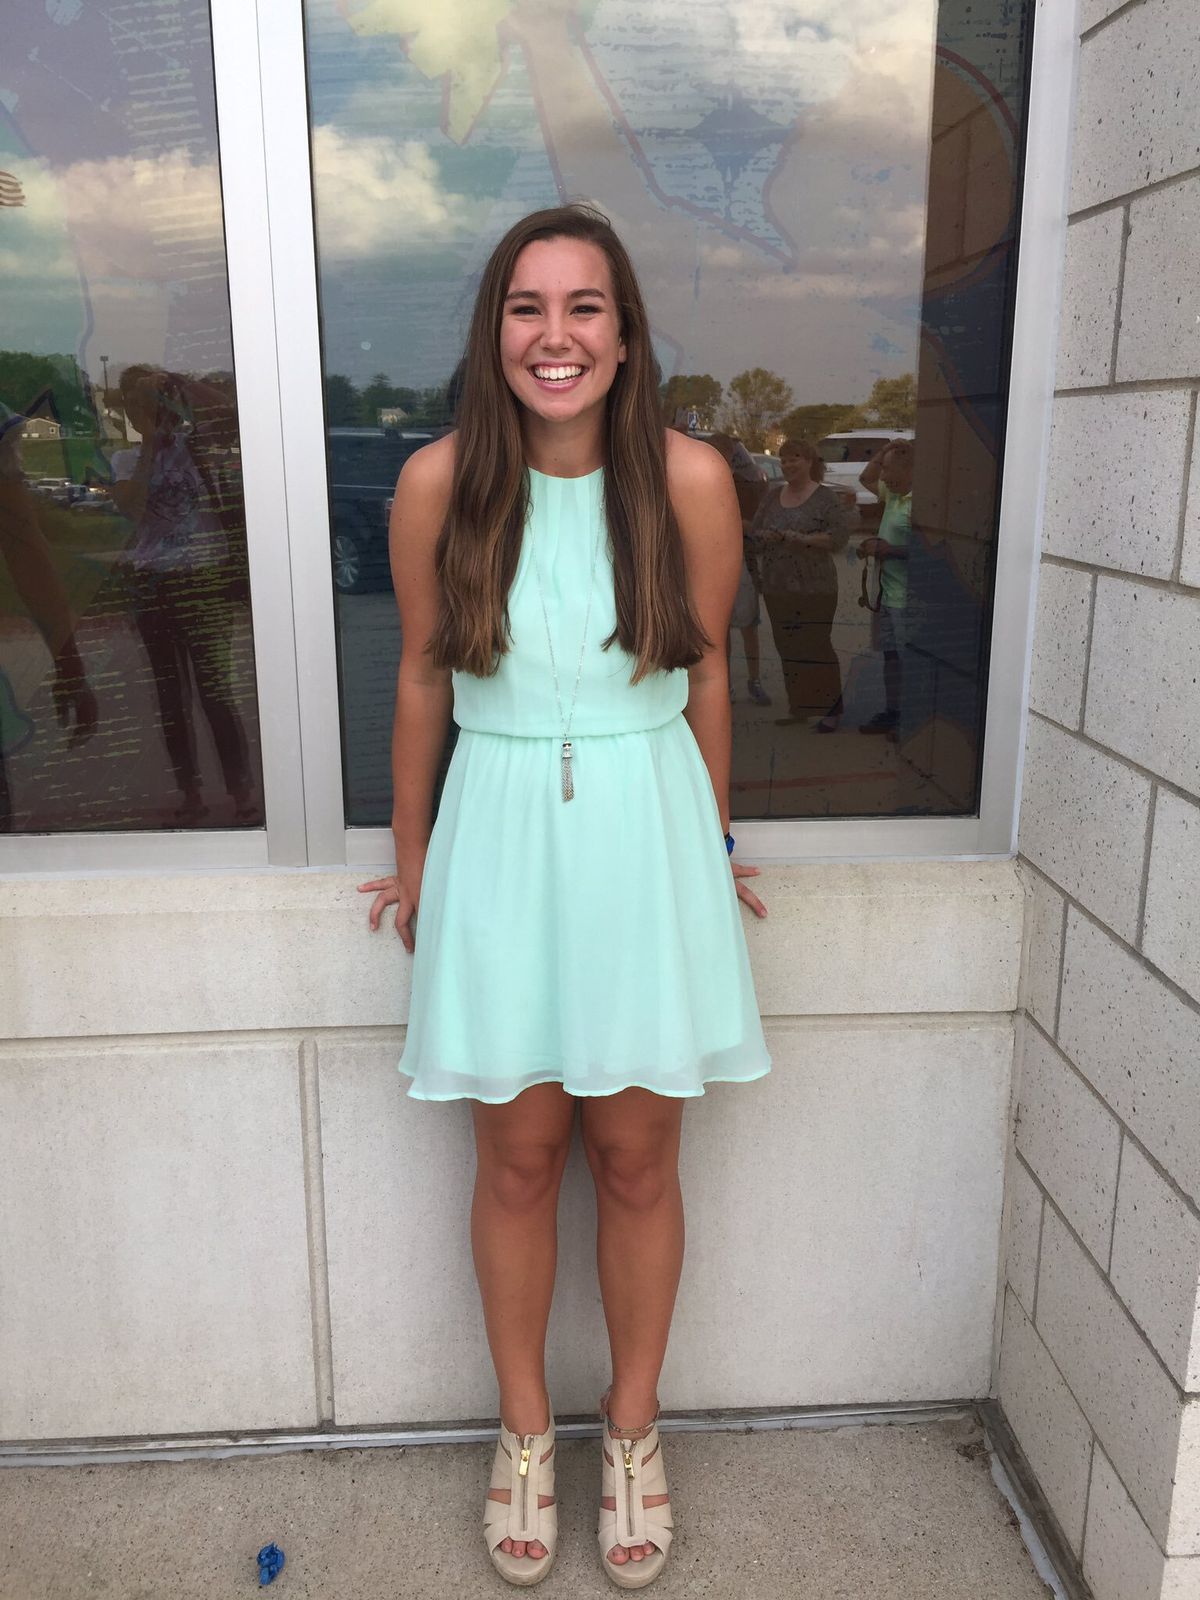 In this September 2016 photo provided by Kim Calderwood, Mollie Tibbetts poses for a picture during homecoming festivities at BGM High School in her hometown of Brooklyn, Iowa. Cristhian Bahena Rivera, the man charged with killing Tibbetts while she was out for a run in July 2018, will stand trial for first-degree murder on Monday, May 17, 2021, in Davenport, Iowa.  (Kim Calderwood)